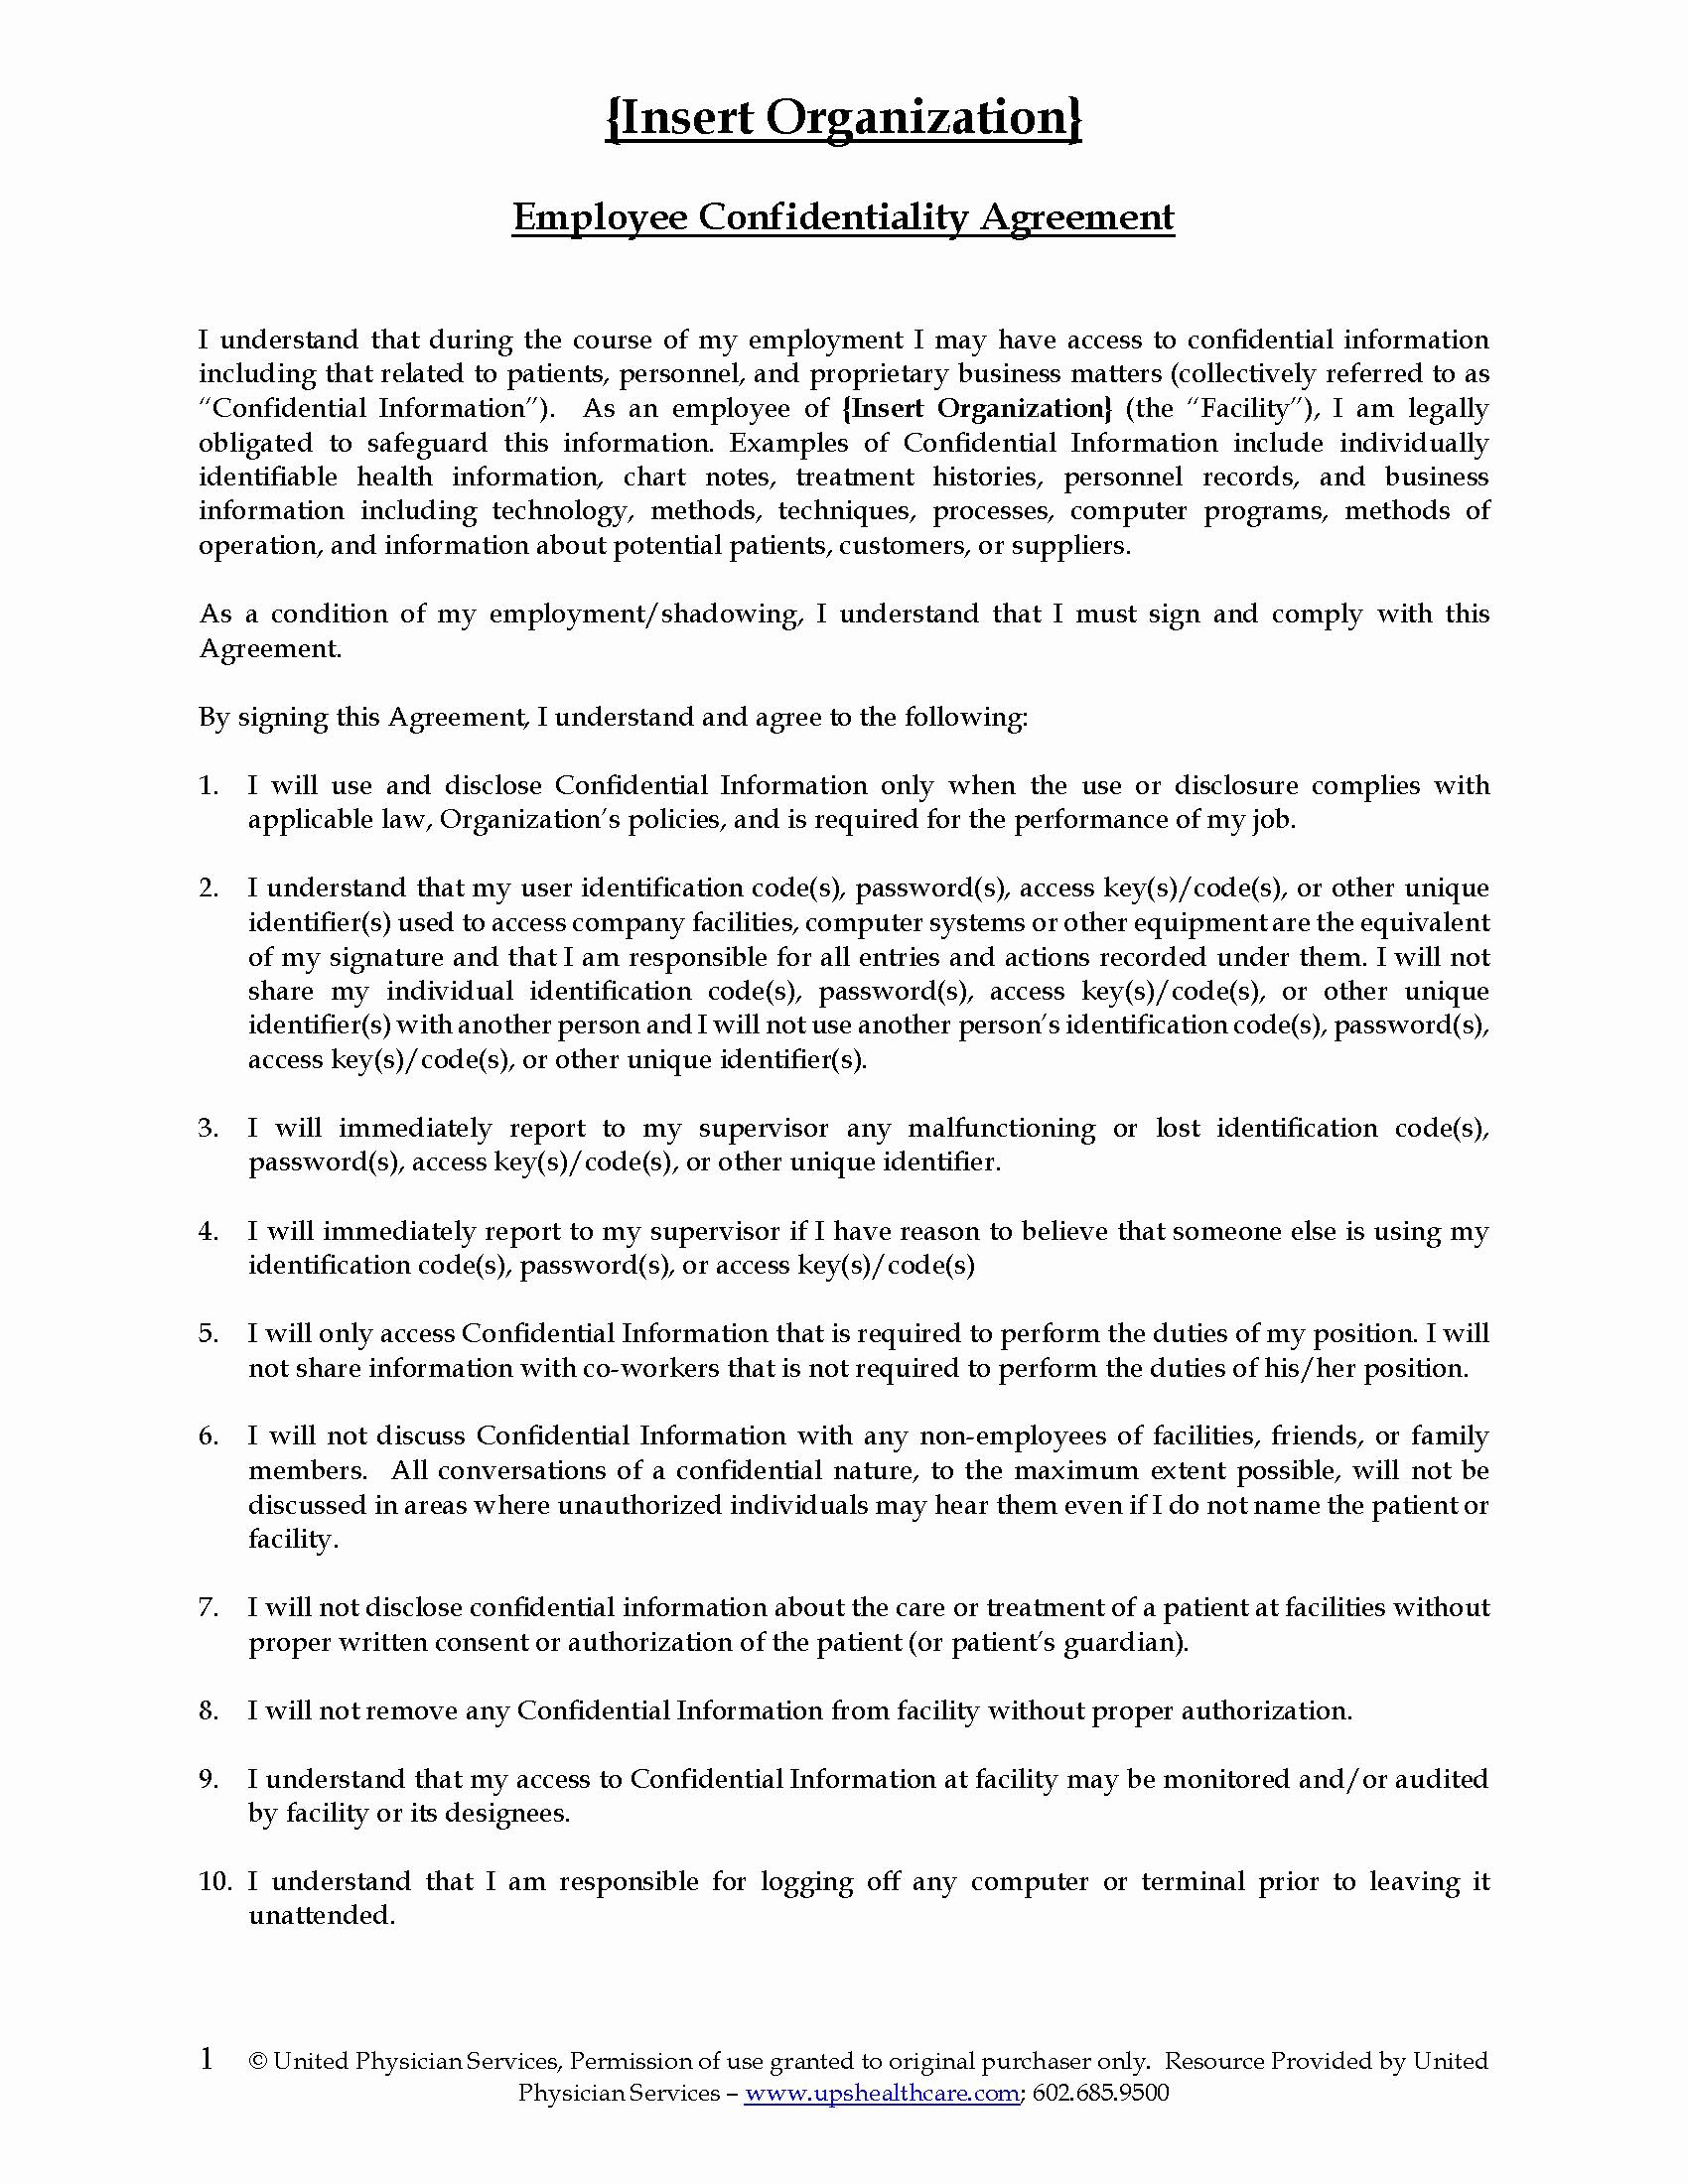 Confidentiality Clause for Documents Awesome Employee Confidentiality Agreement